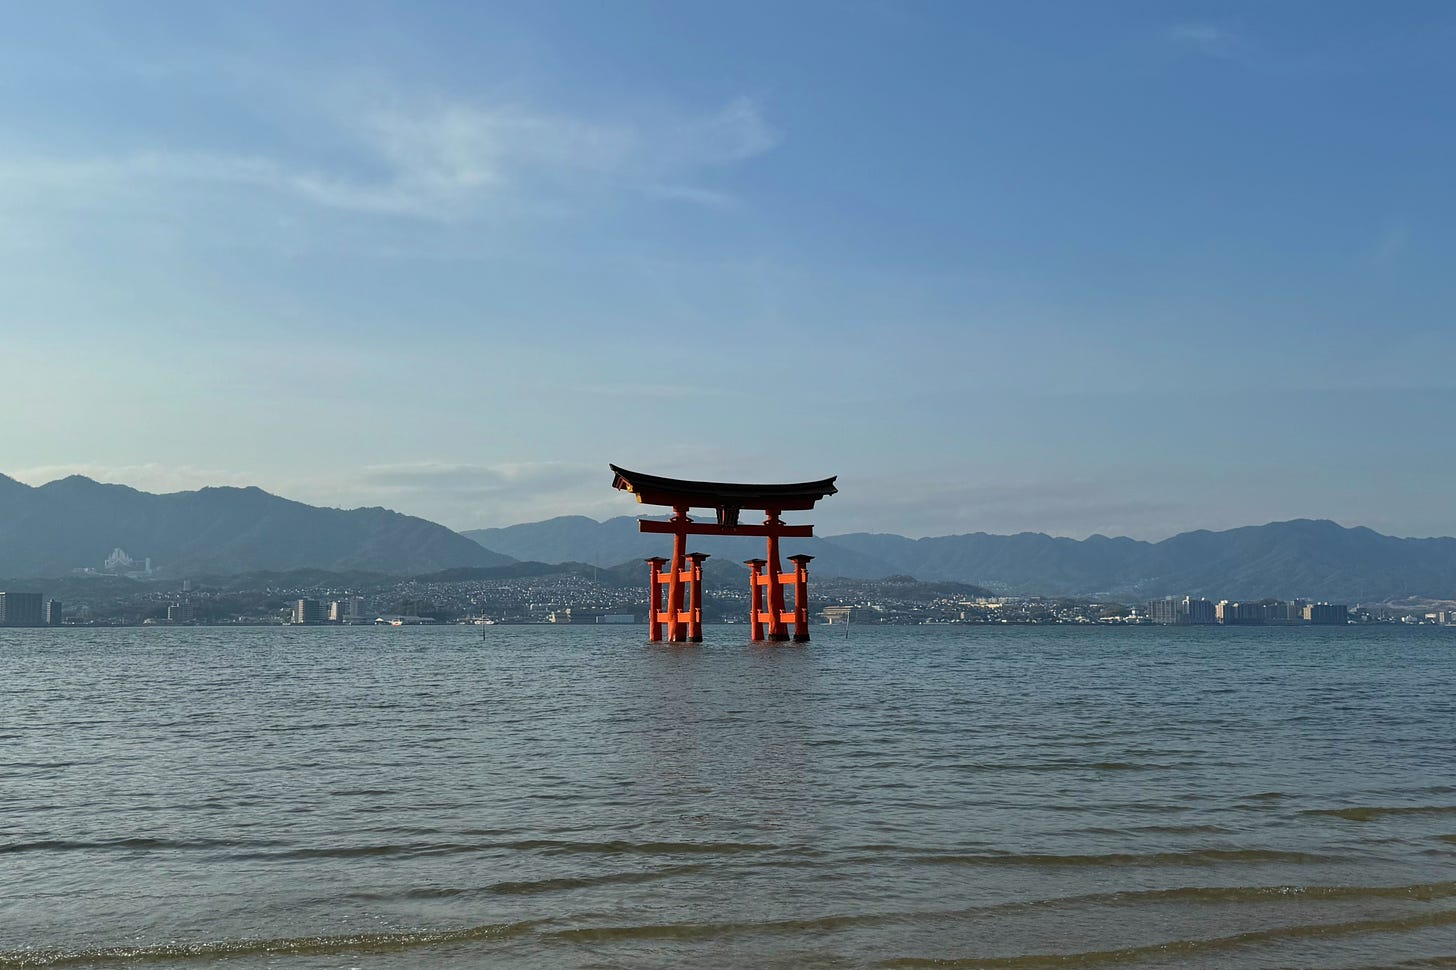 torii gate standing in the water - author's own photo